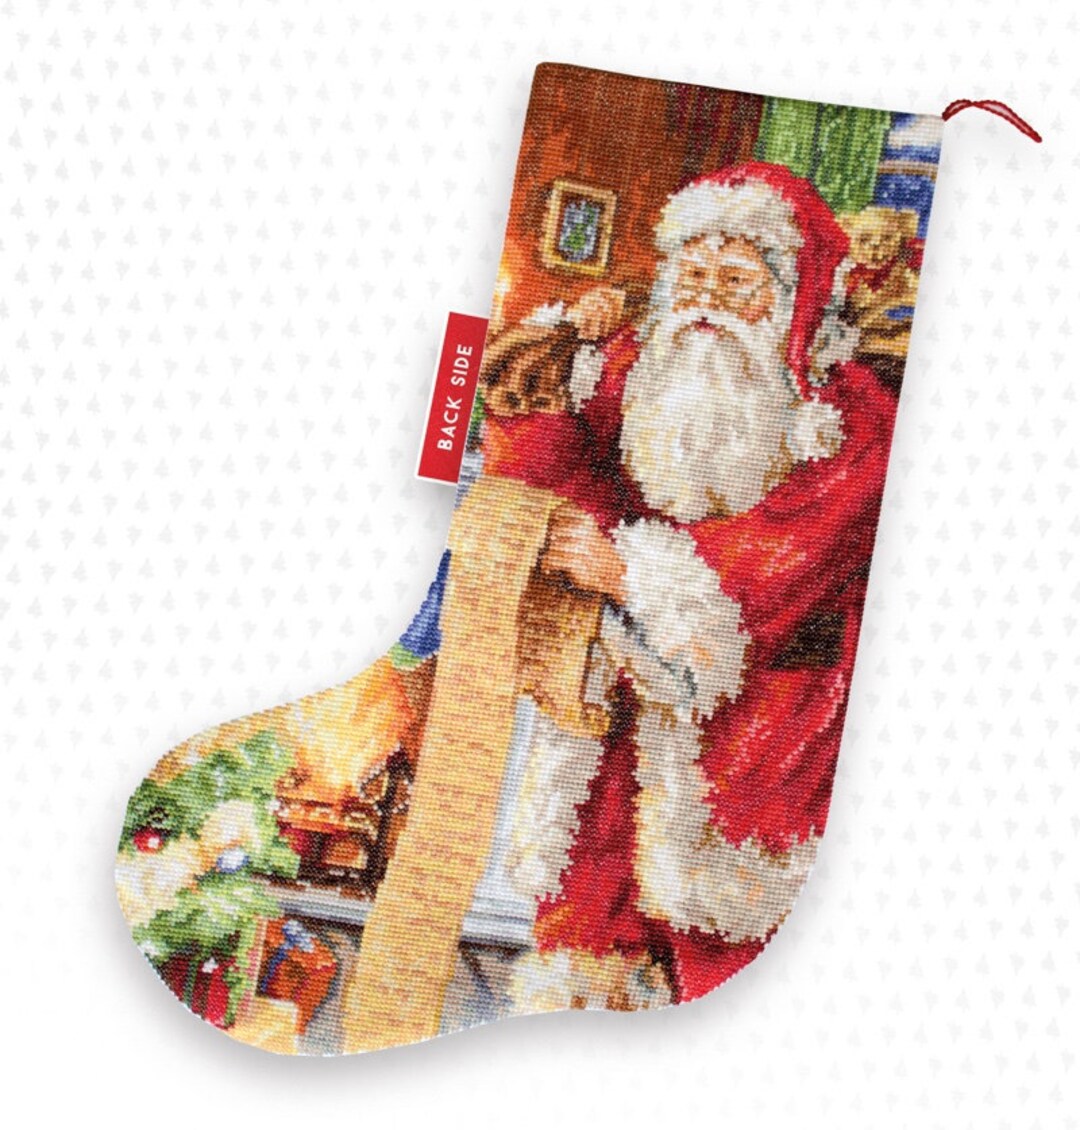 Letistitch counted cross stitch kit Christmas Stocking, 37x24,5cm, DIY